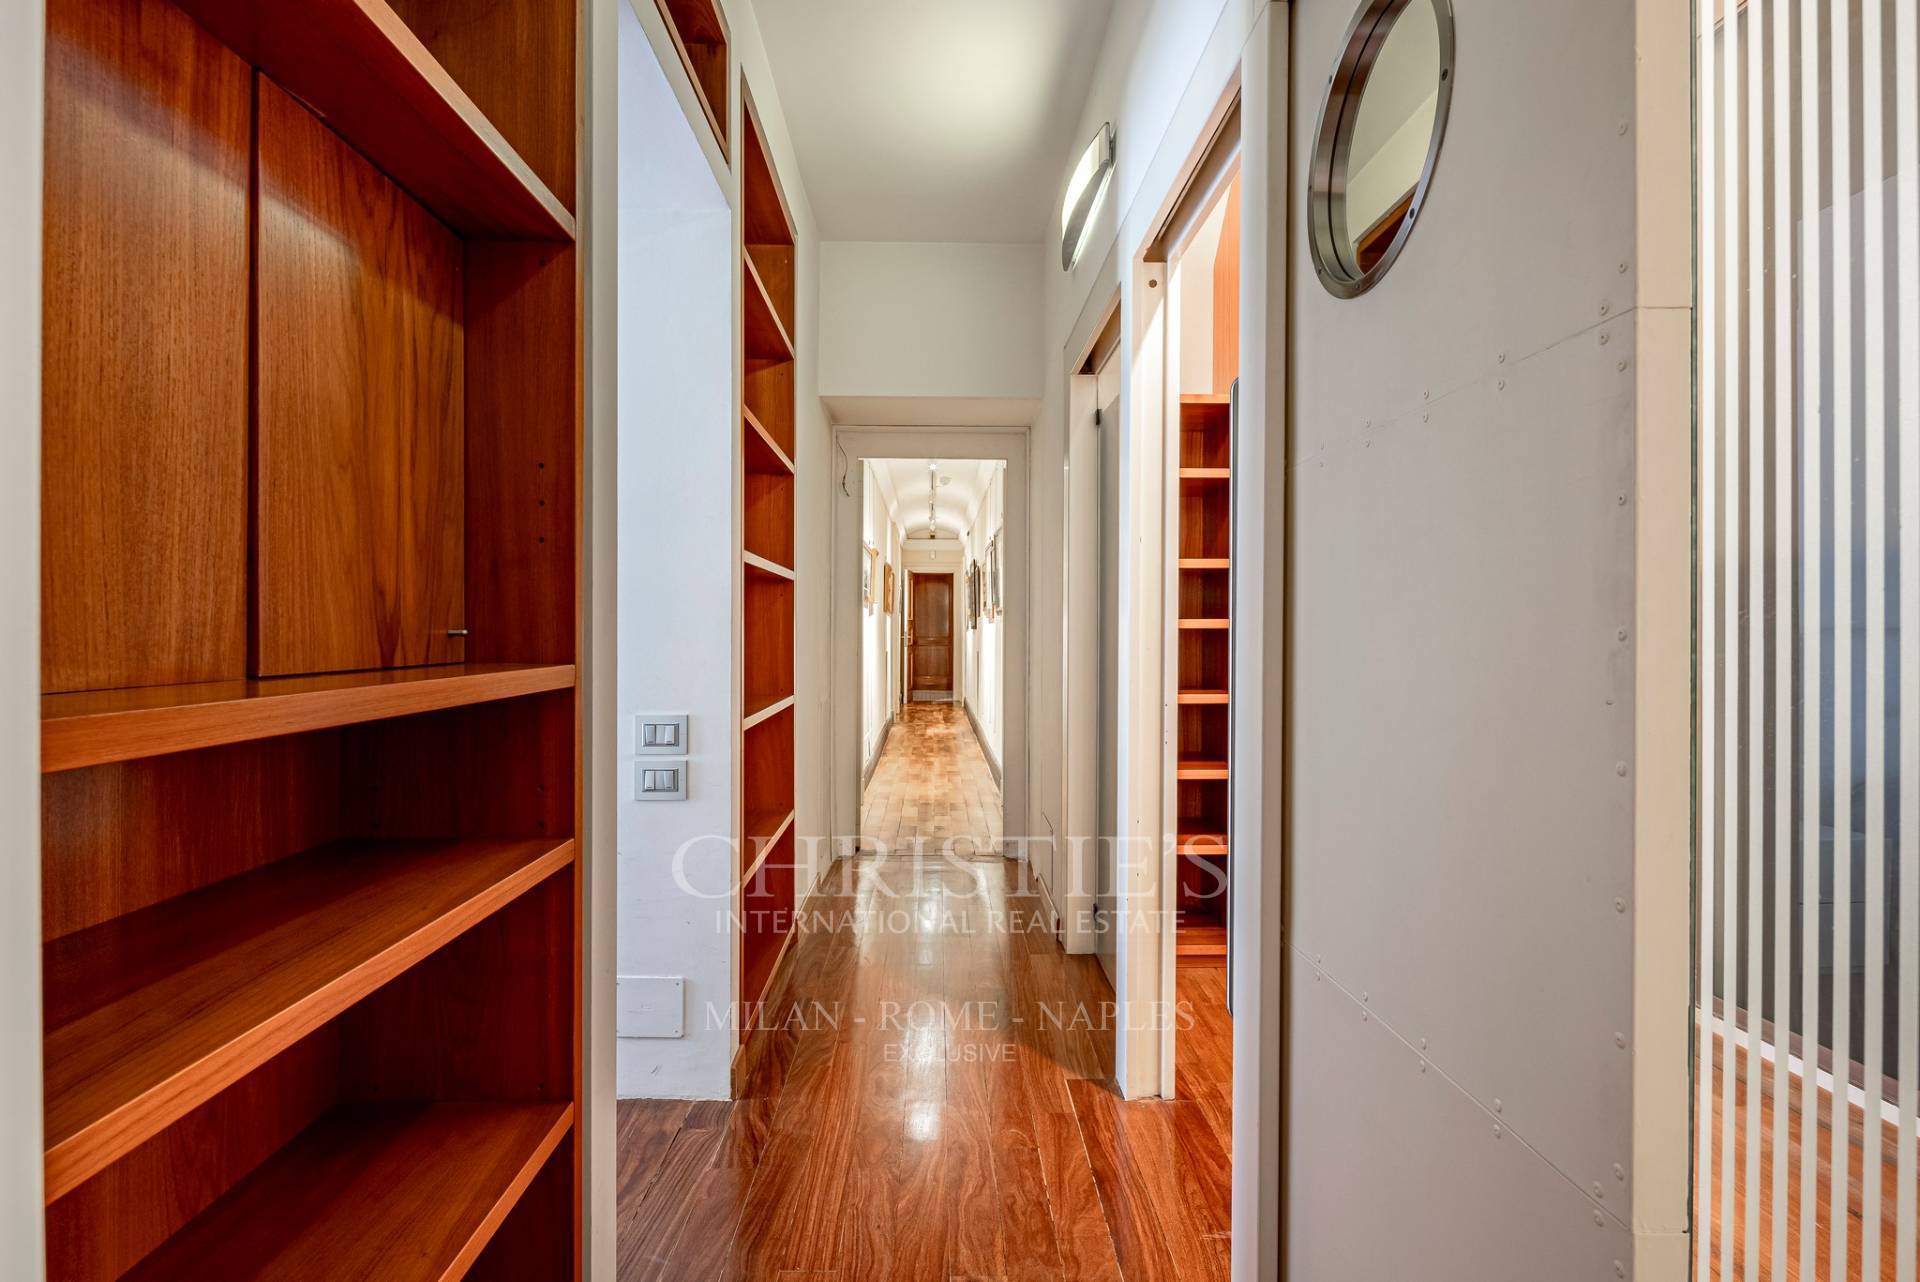 picture of One-of-a-kind Apartment In Via Borgonuovo